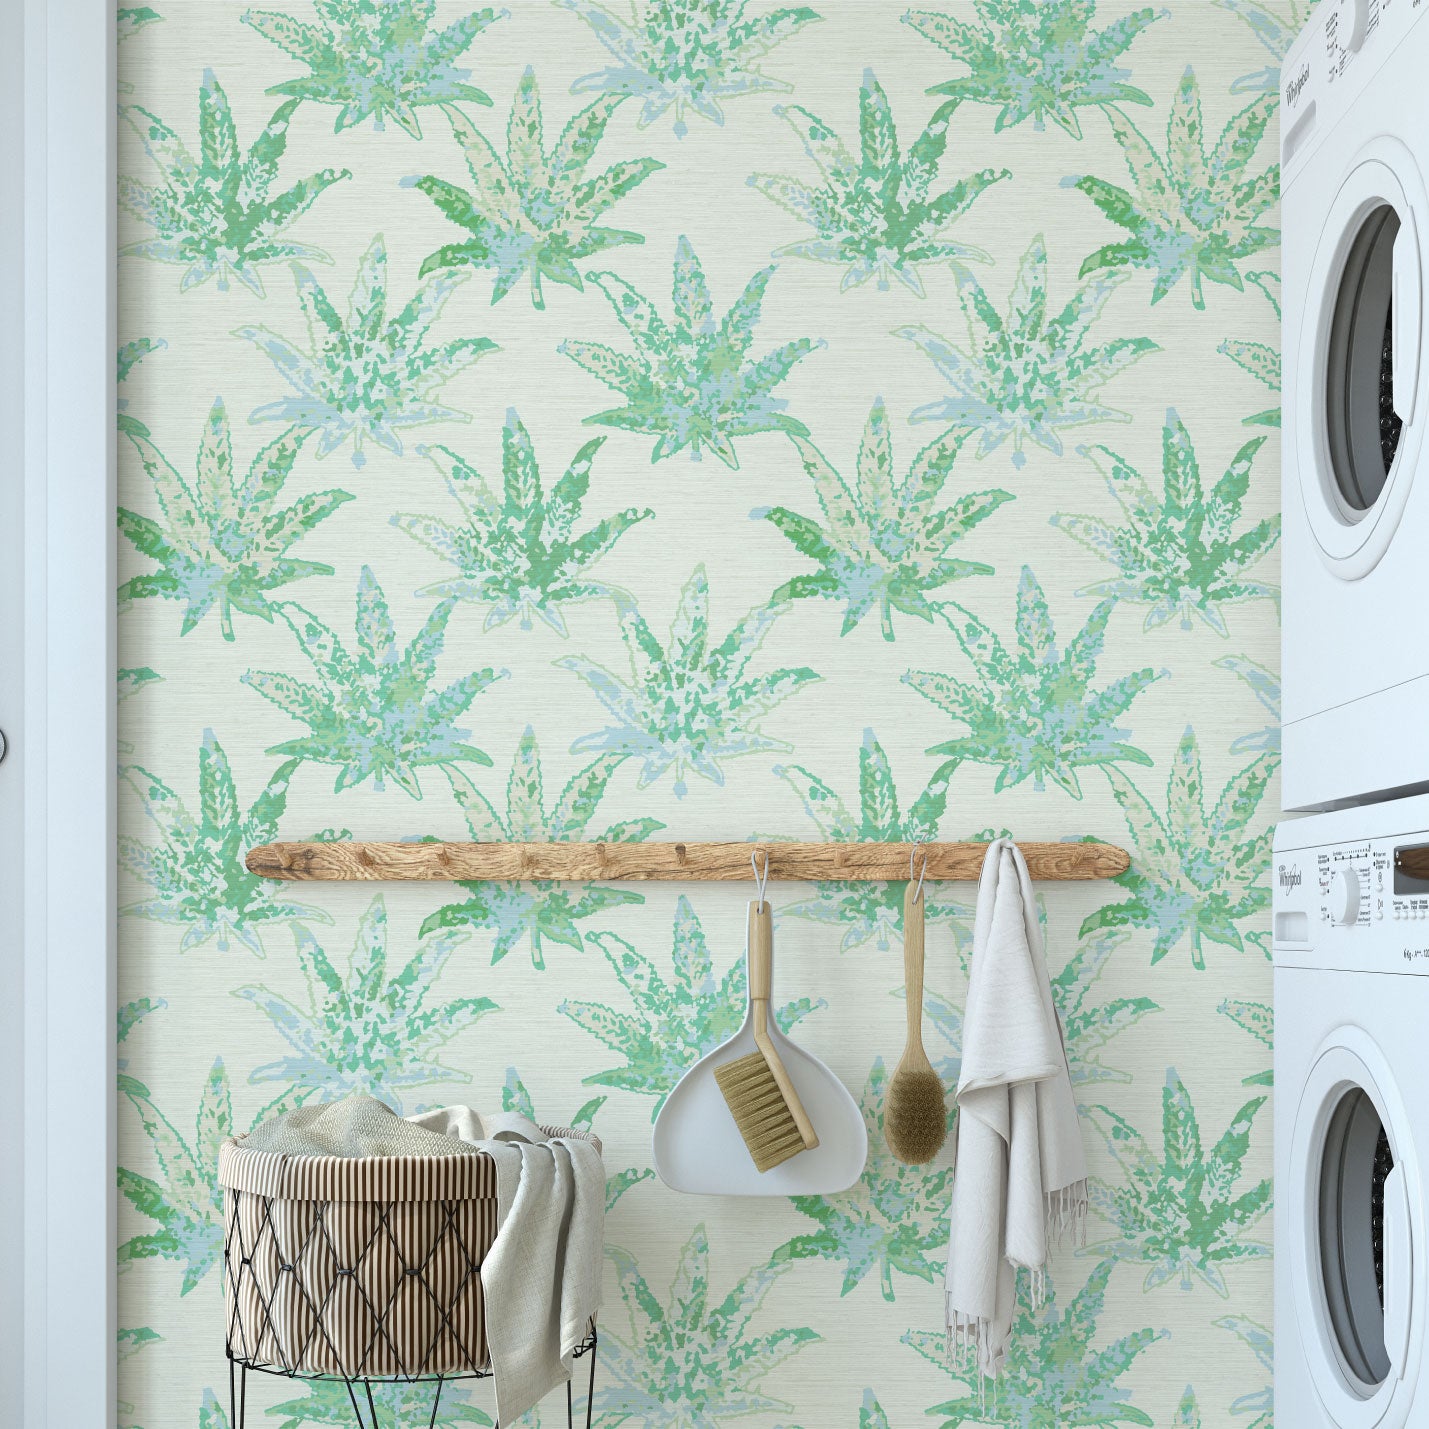 cream based printed grasscloth texture natural nature eco-friendly wallpaper wall-covering oversize marijuana weed mary jane leaf leaves arranged in a grid-like pattern tonal green watercolor leafs custom design interior design botanical garden tropical cream green bold high quality unique retro chic tropical jungle vacation retreat beach surf coastal laundry room